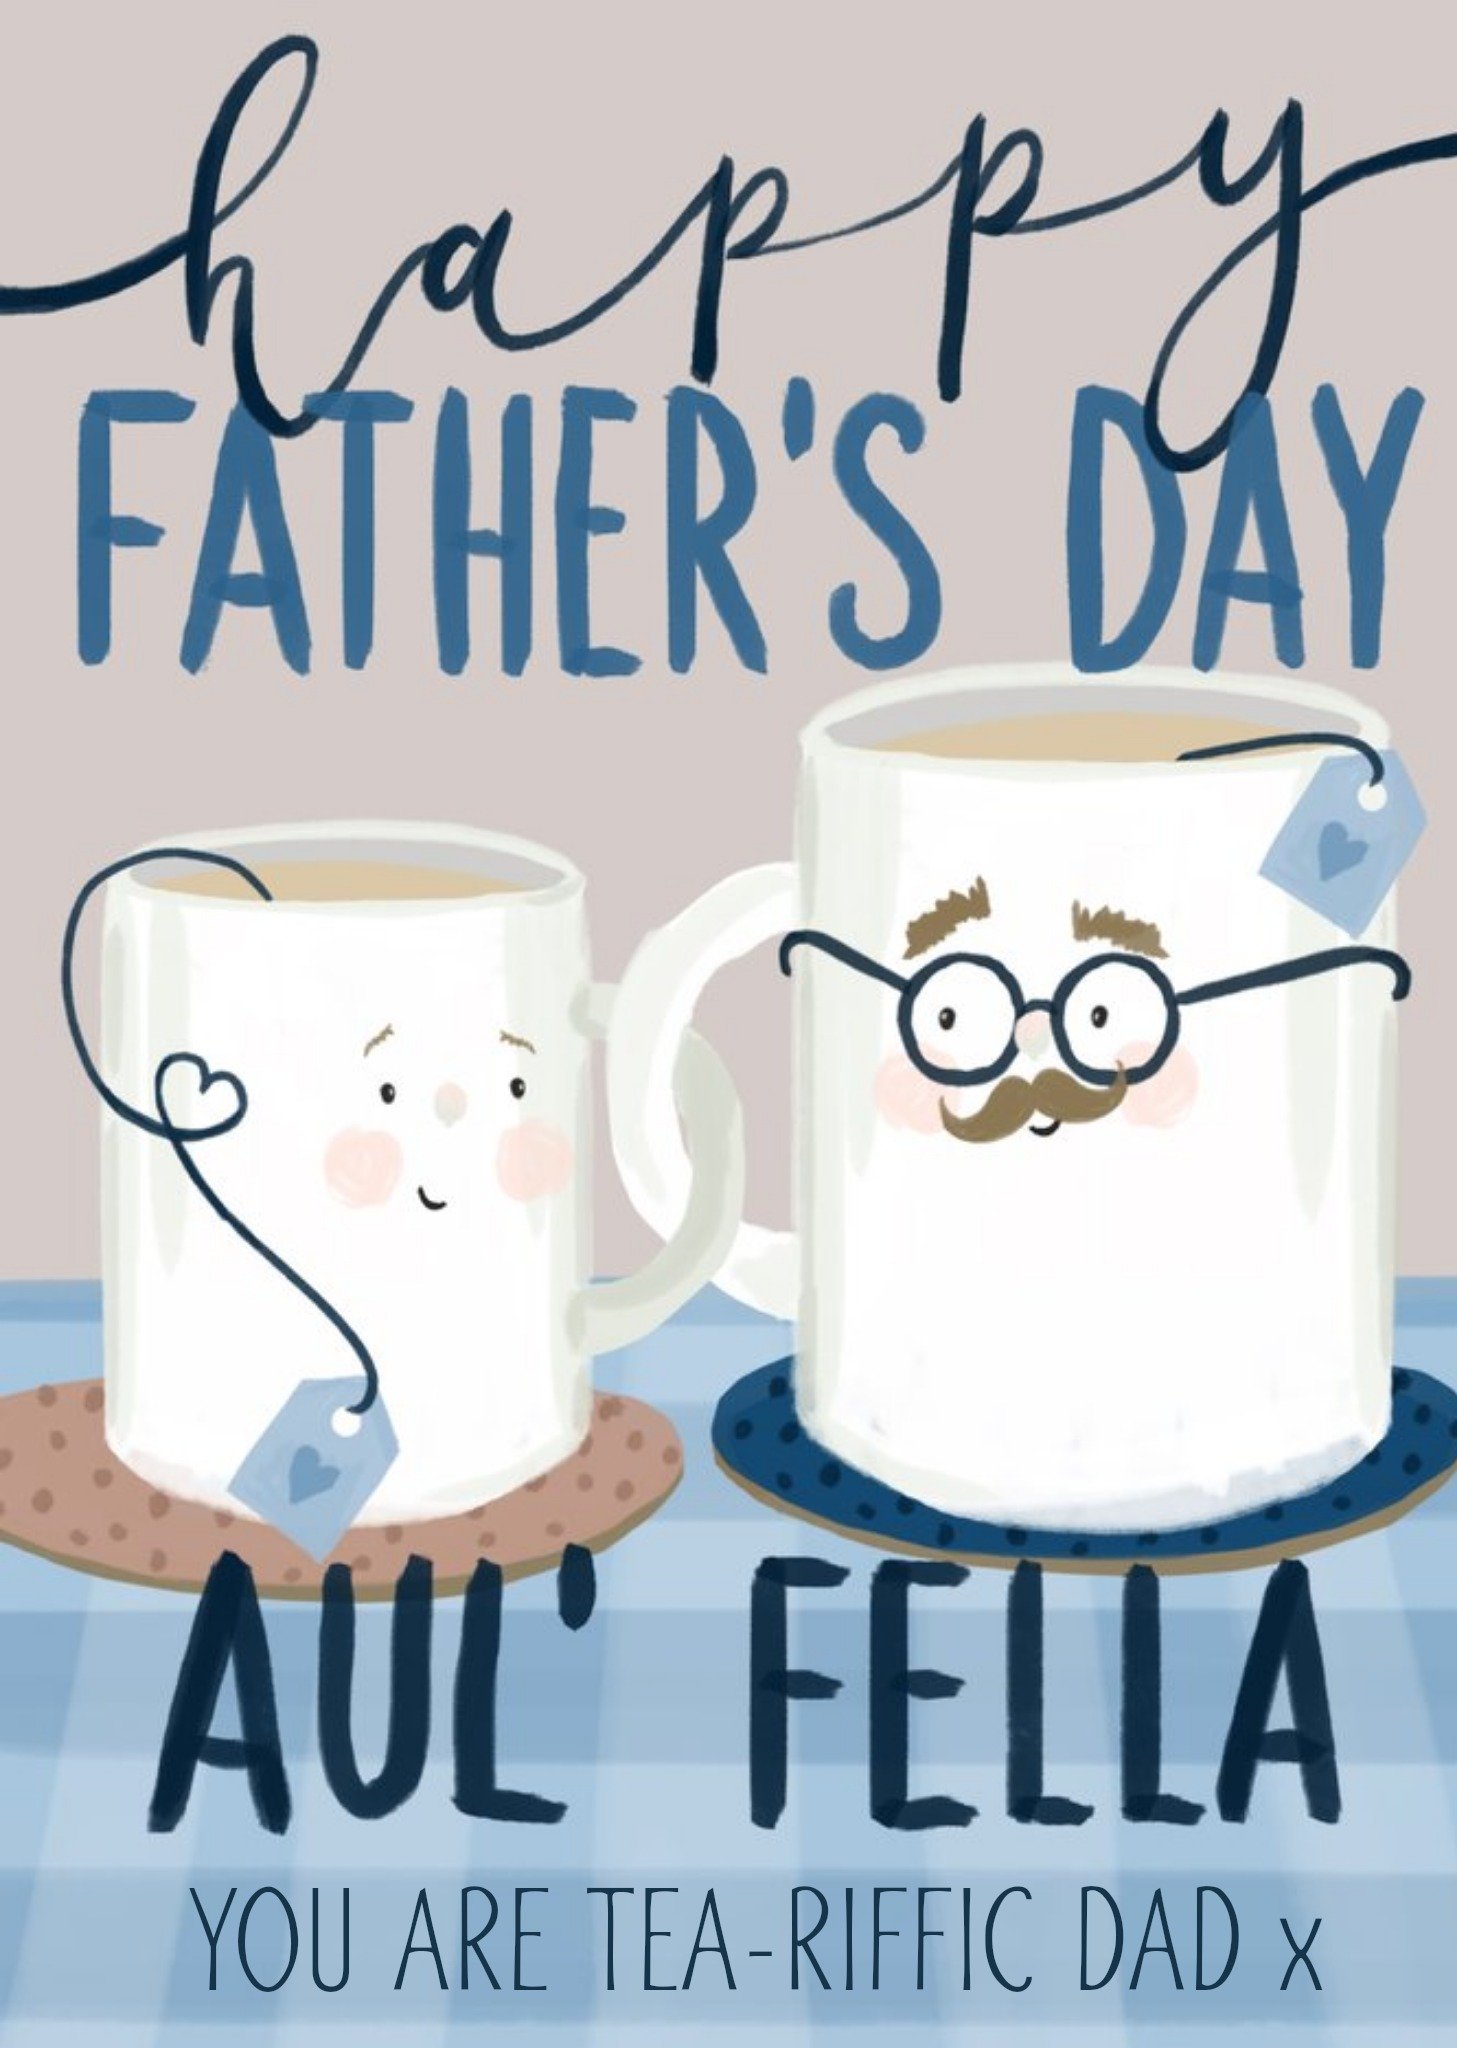 Moonpig Okey Dokey Design Illustrated Happy Father's Day Aul' Fella Father's Day Card Ecard